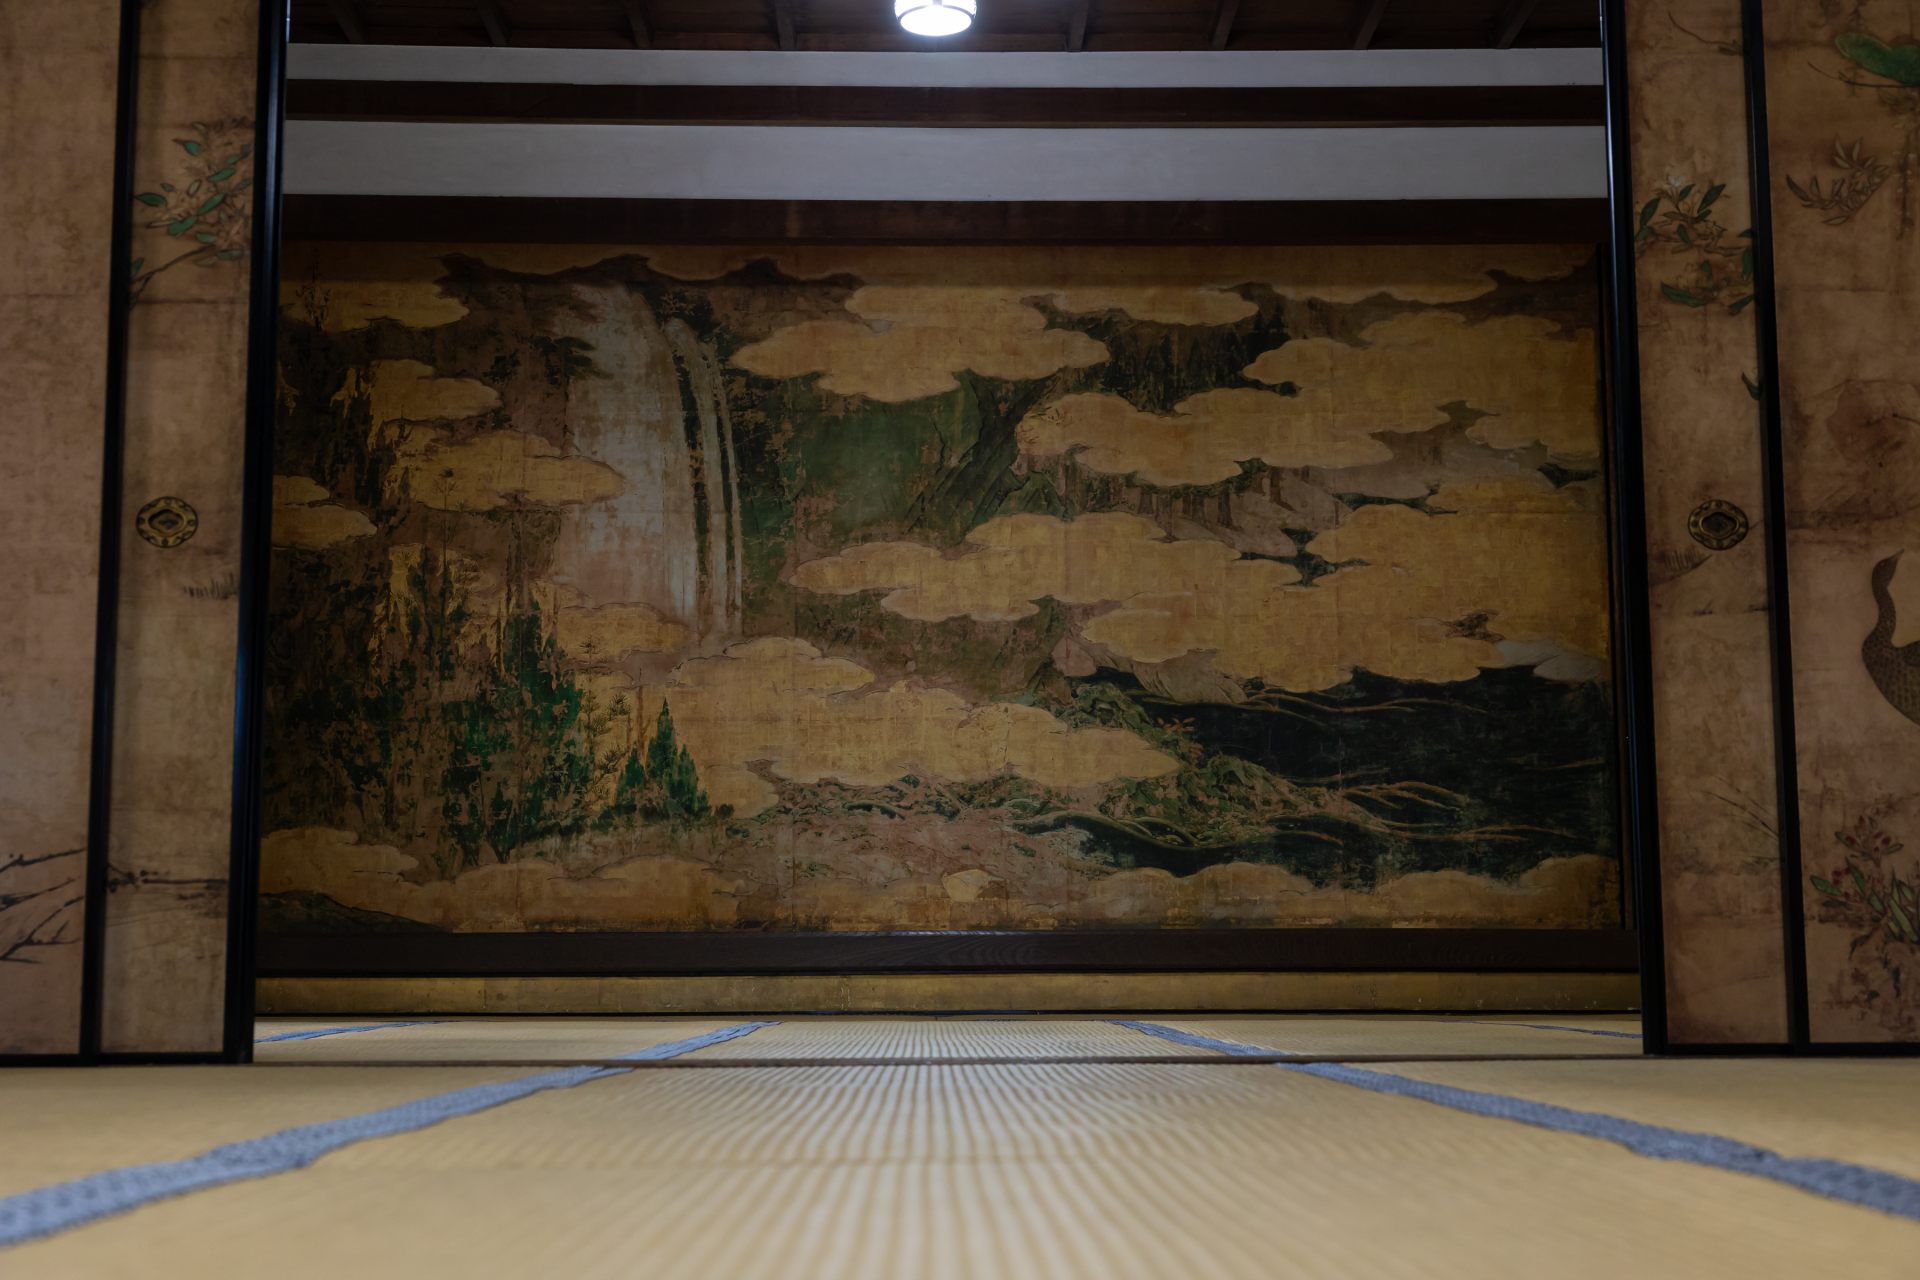 Room partitions covered in original paintings by the Kano school (of Japanese painting). This is of a waterfall, called “Ichinoma no Takizu.”